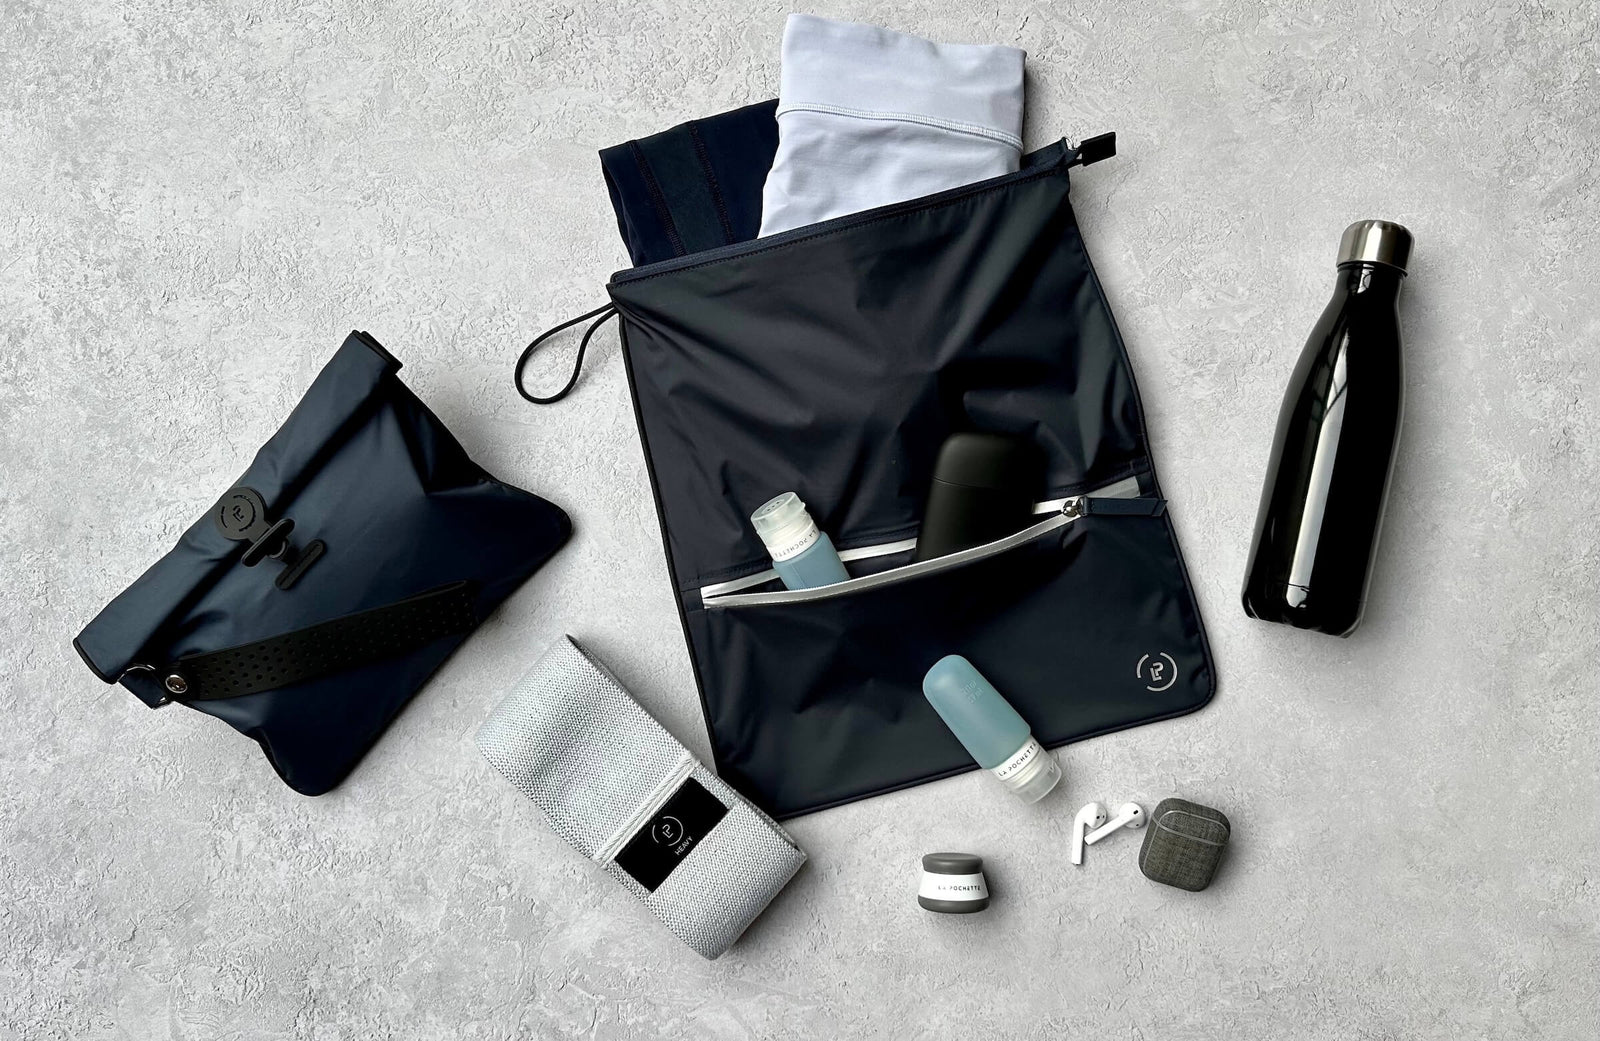 My Top 10 Gym Bag Essentials,  #gym #organised # workout #exercise - Tap the p…